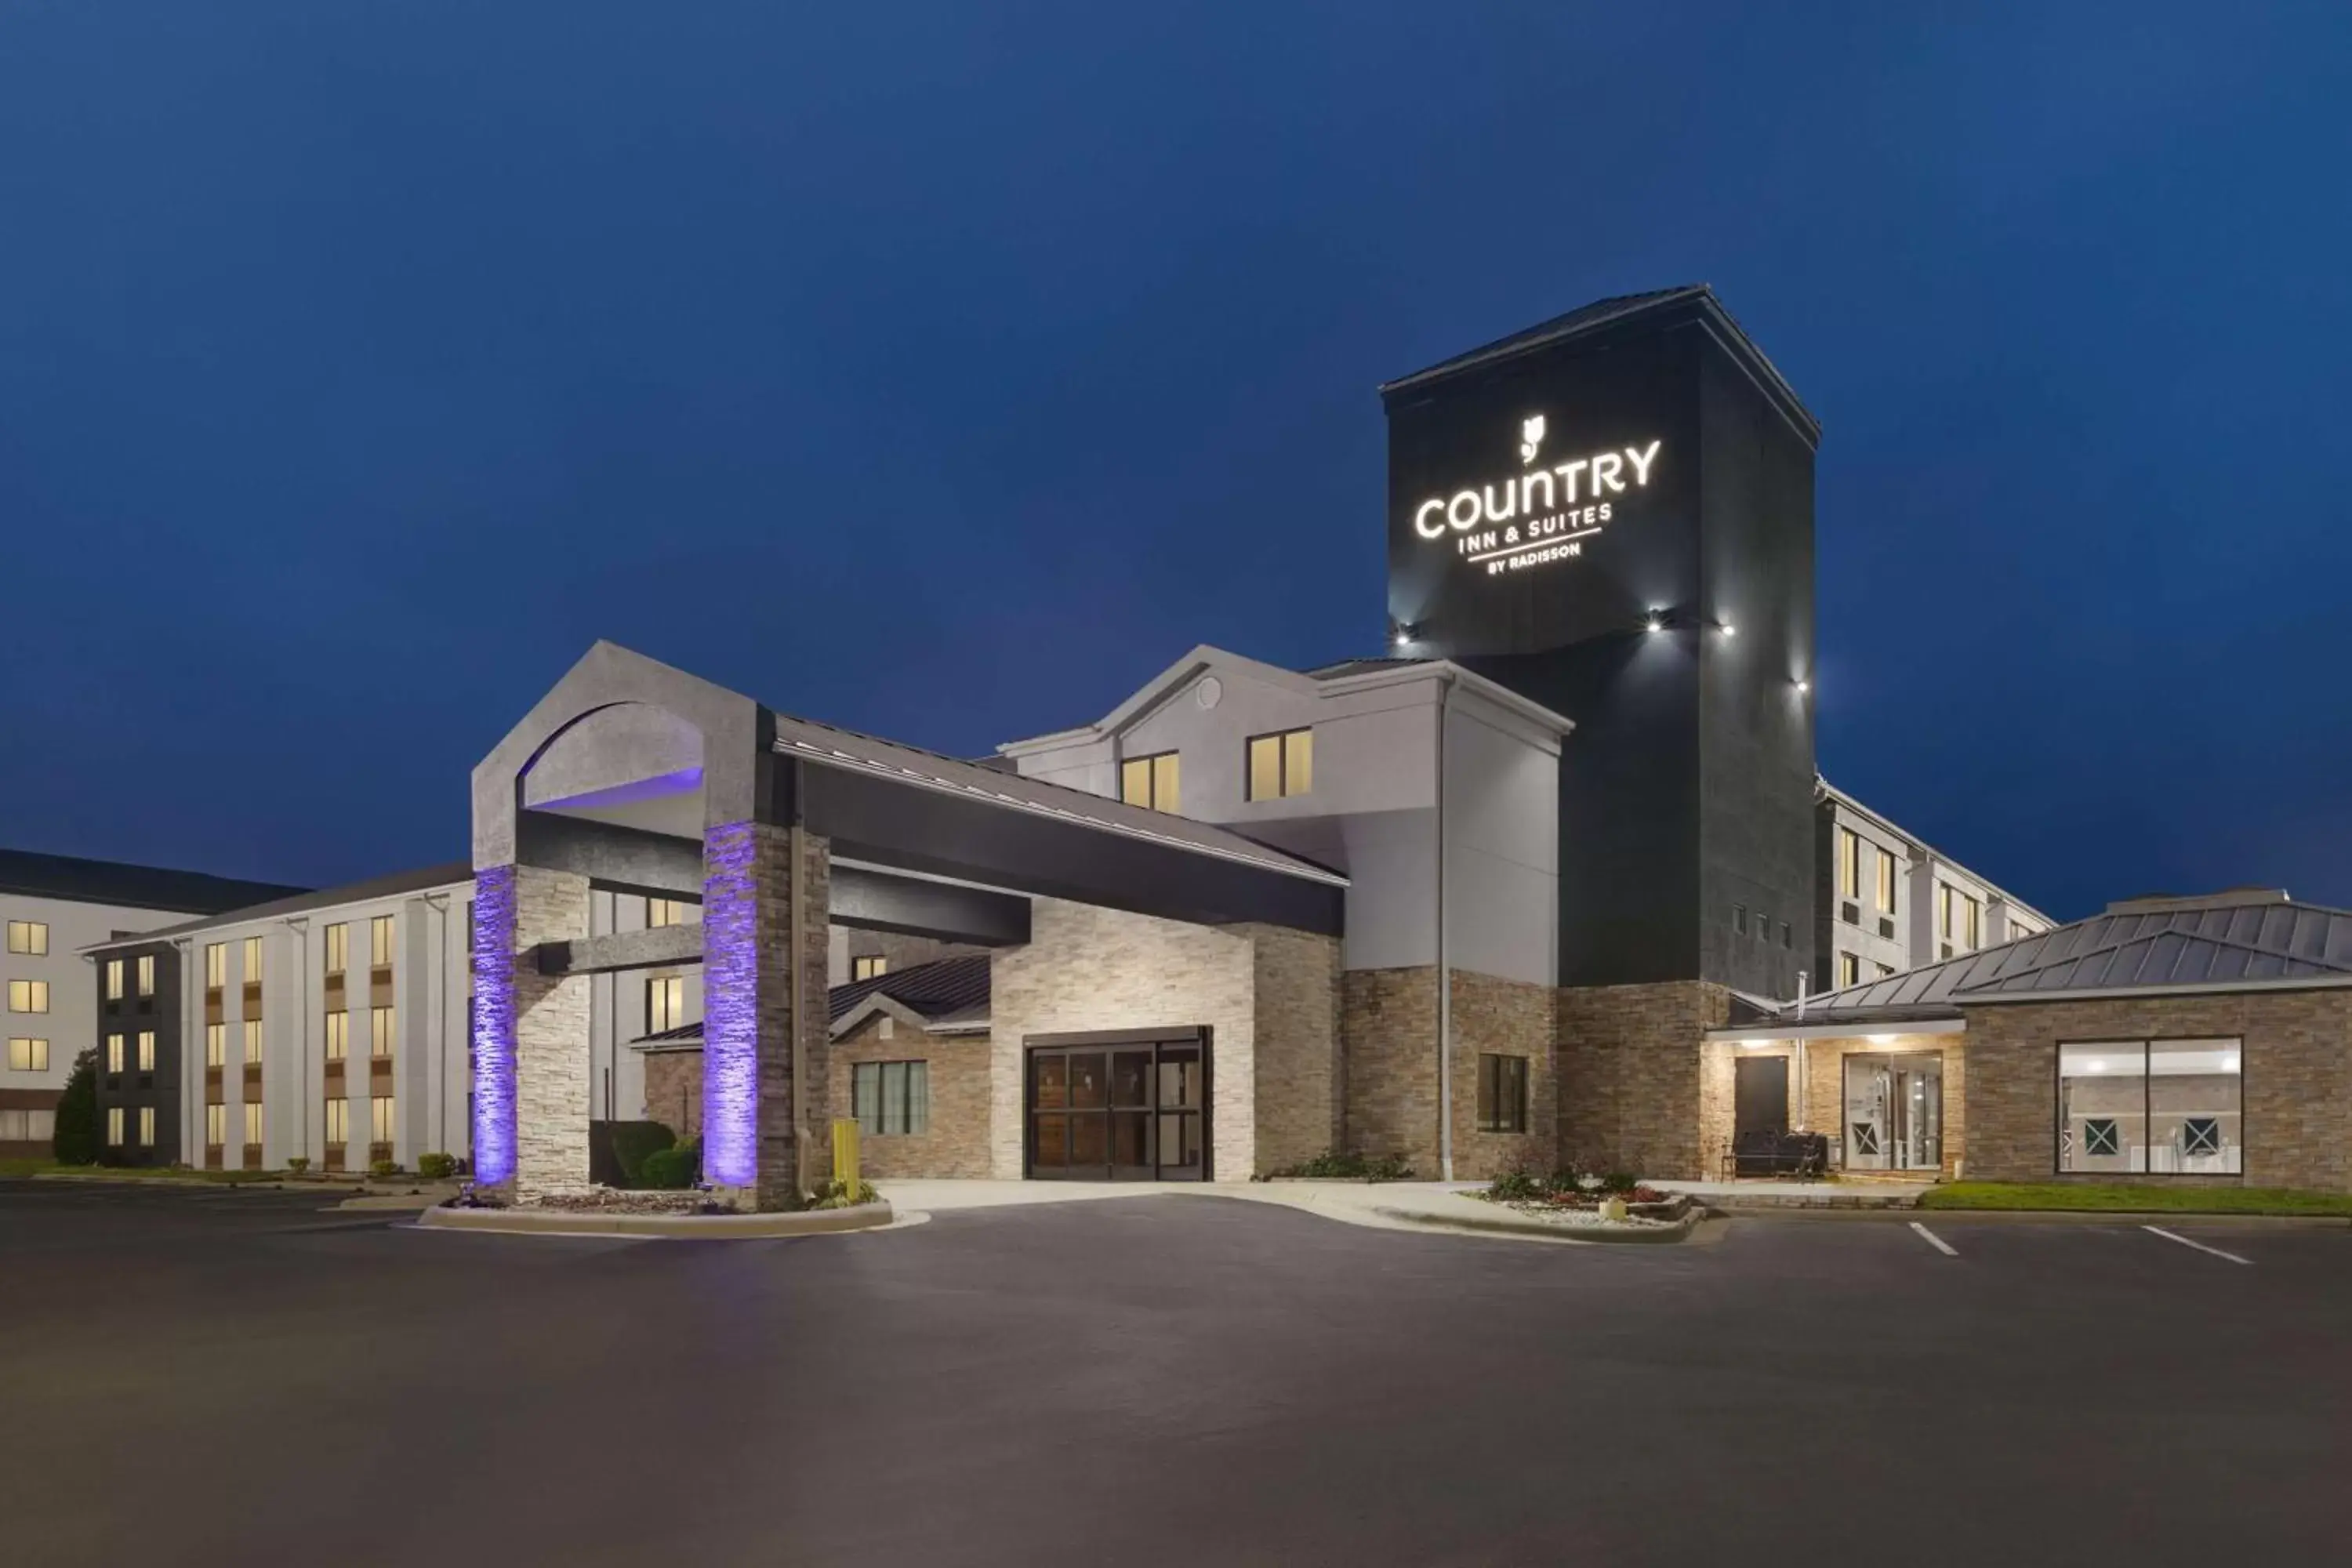 Property building in Country Inn & Suites by Radisson, Roanoke Rapids, NC